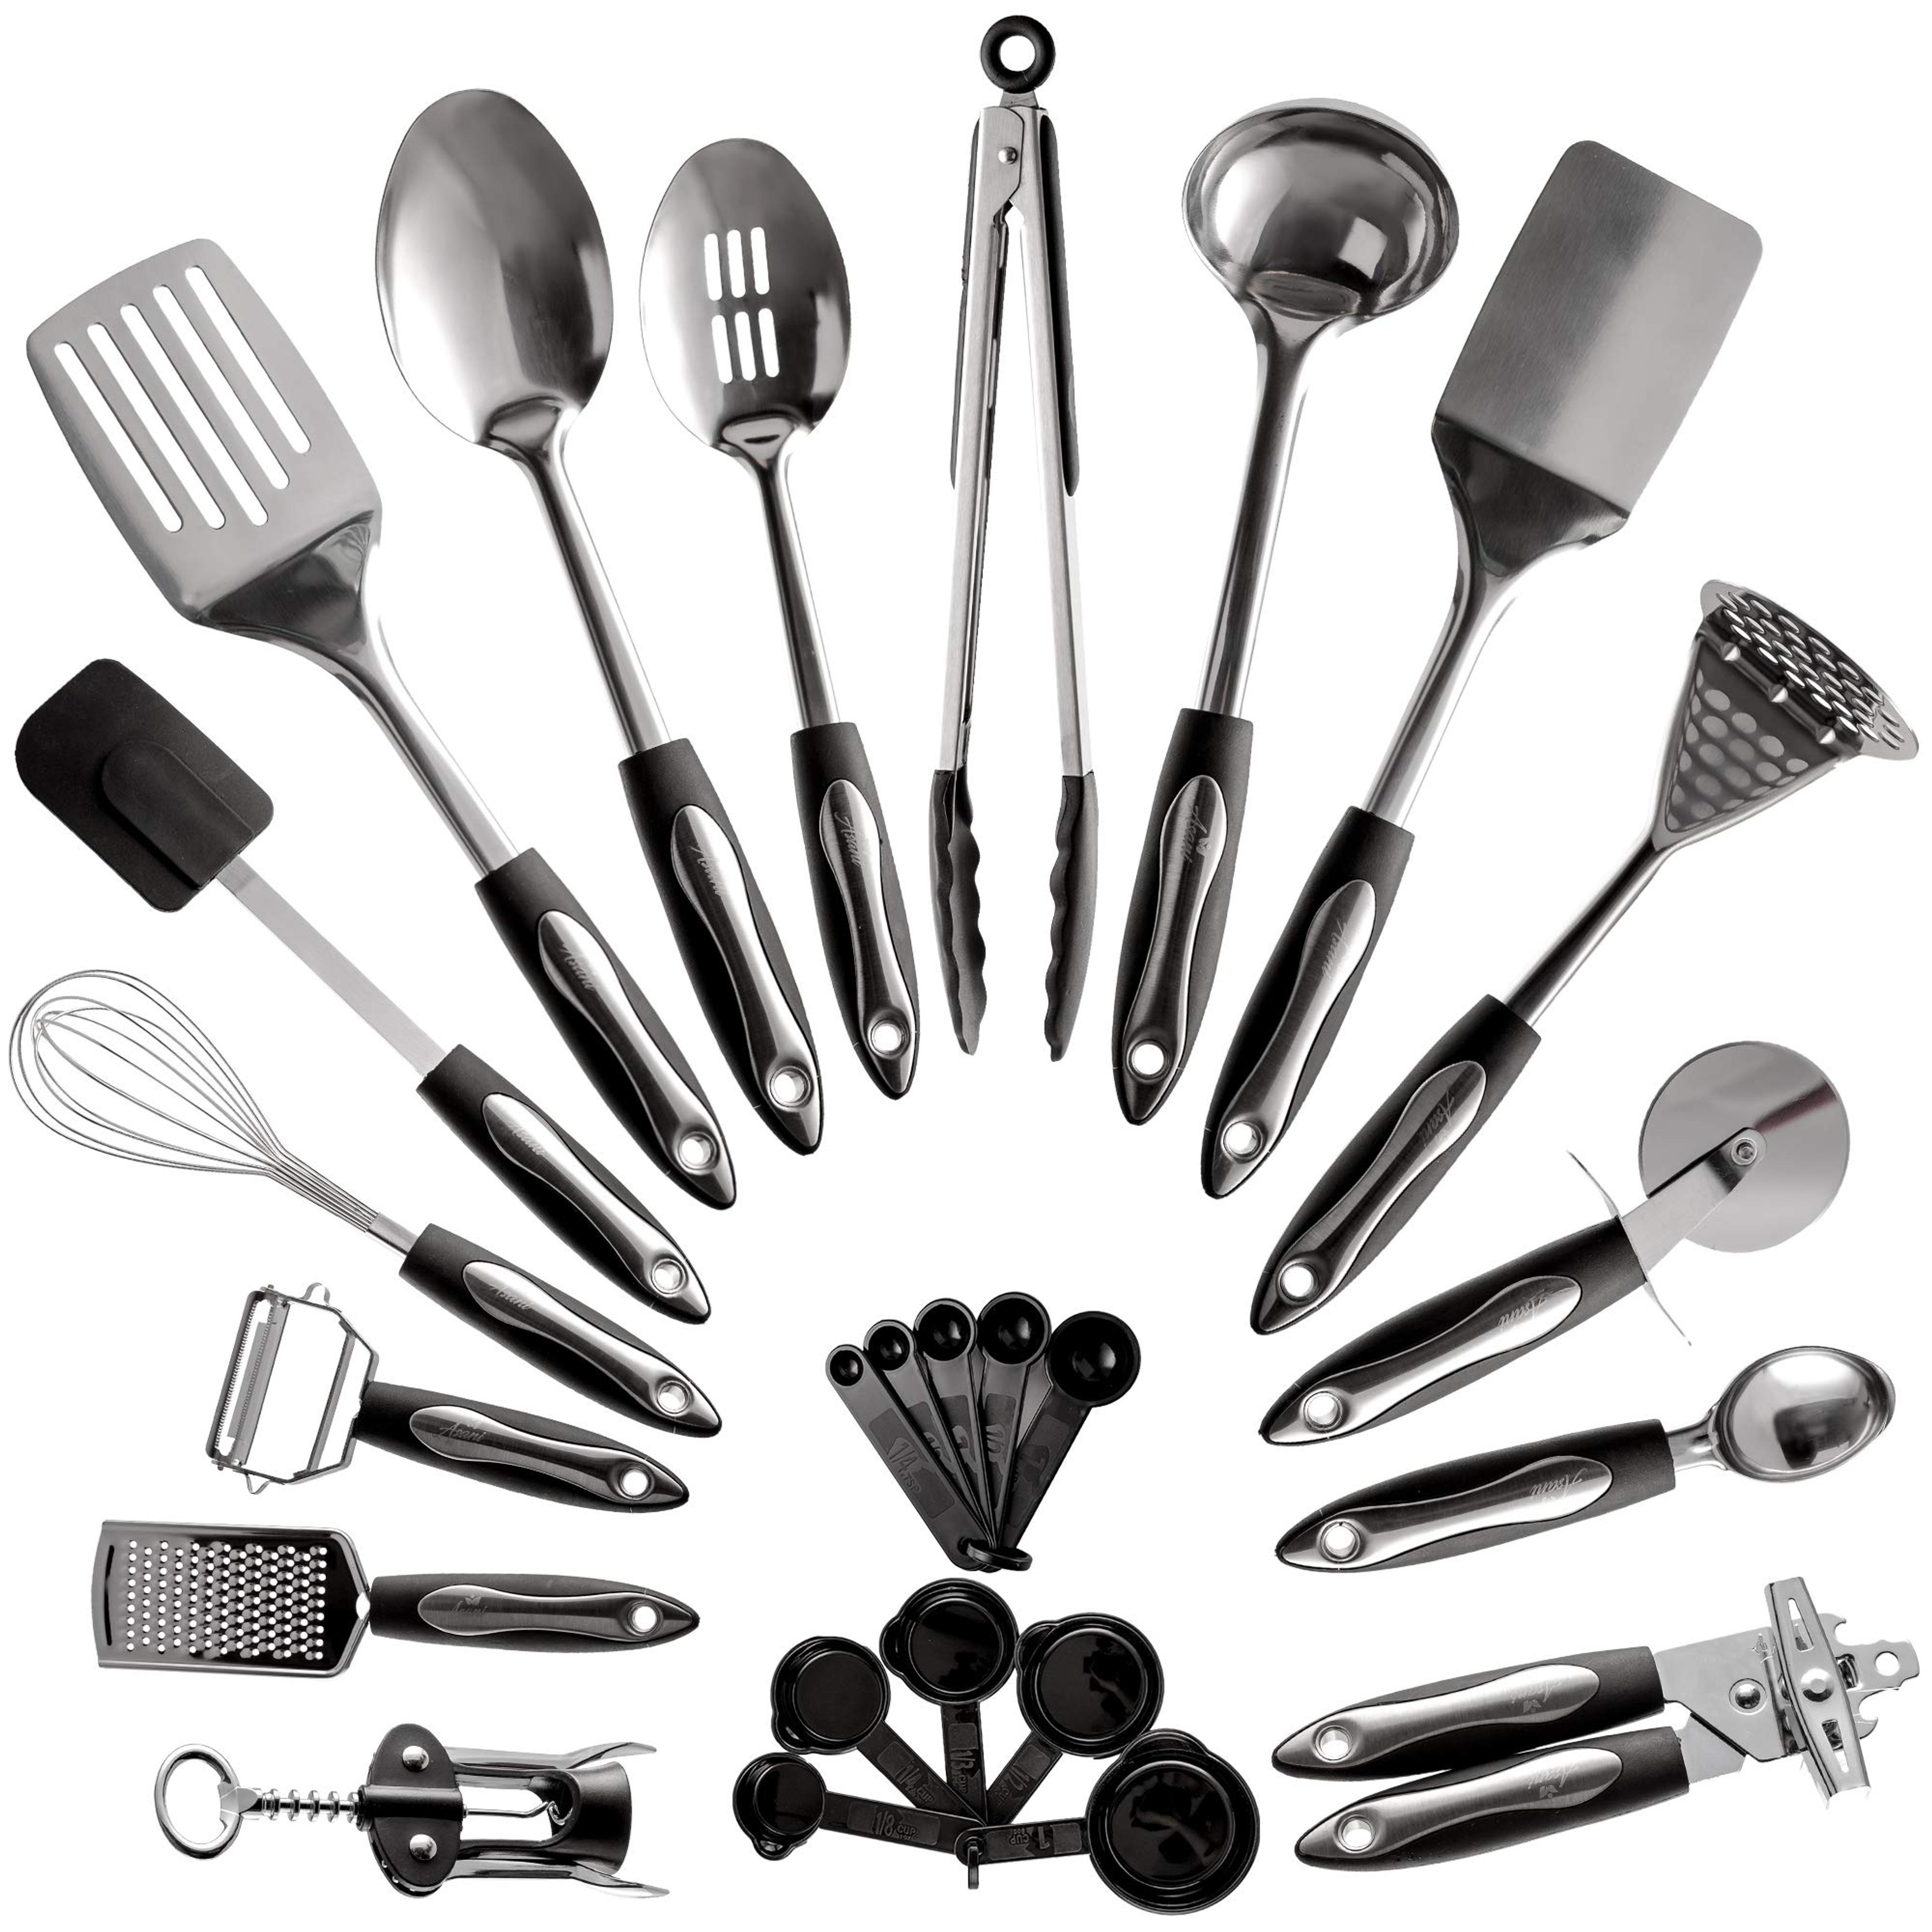 Amazon.com: 25-Piece Stainless Steel Kitchen Utensil Set | Non-Stick Cooking Gadgets and Tools Kit | Durable Dishwasher-Safe Cookware Set | Kitchenware Gift Idea, Best New Apartment Essentials : Home & Kitchen